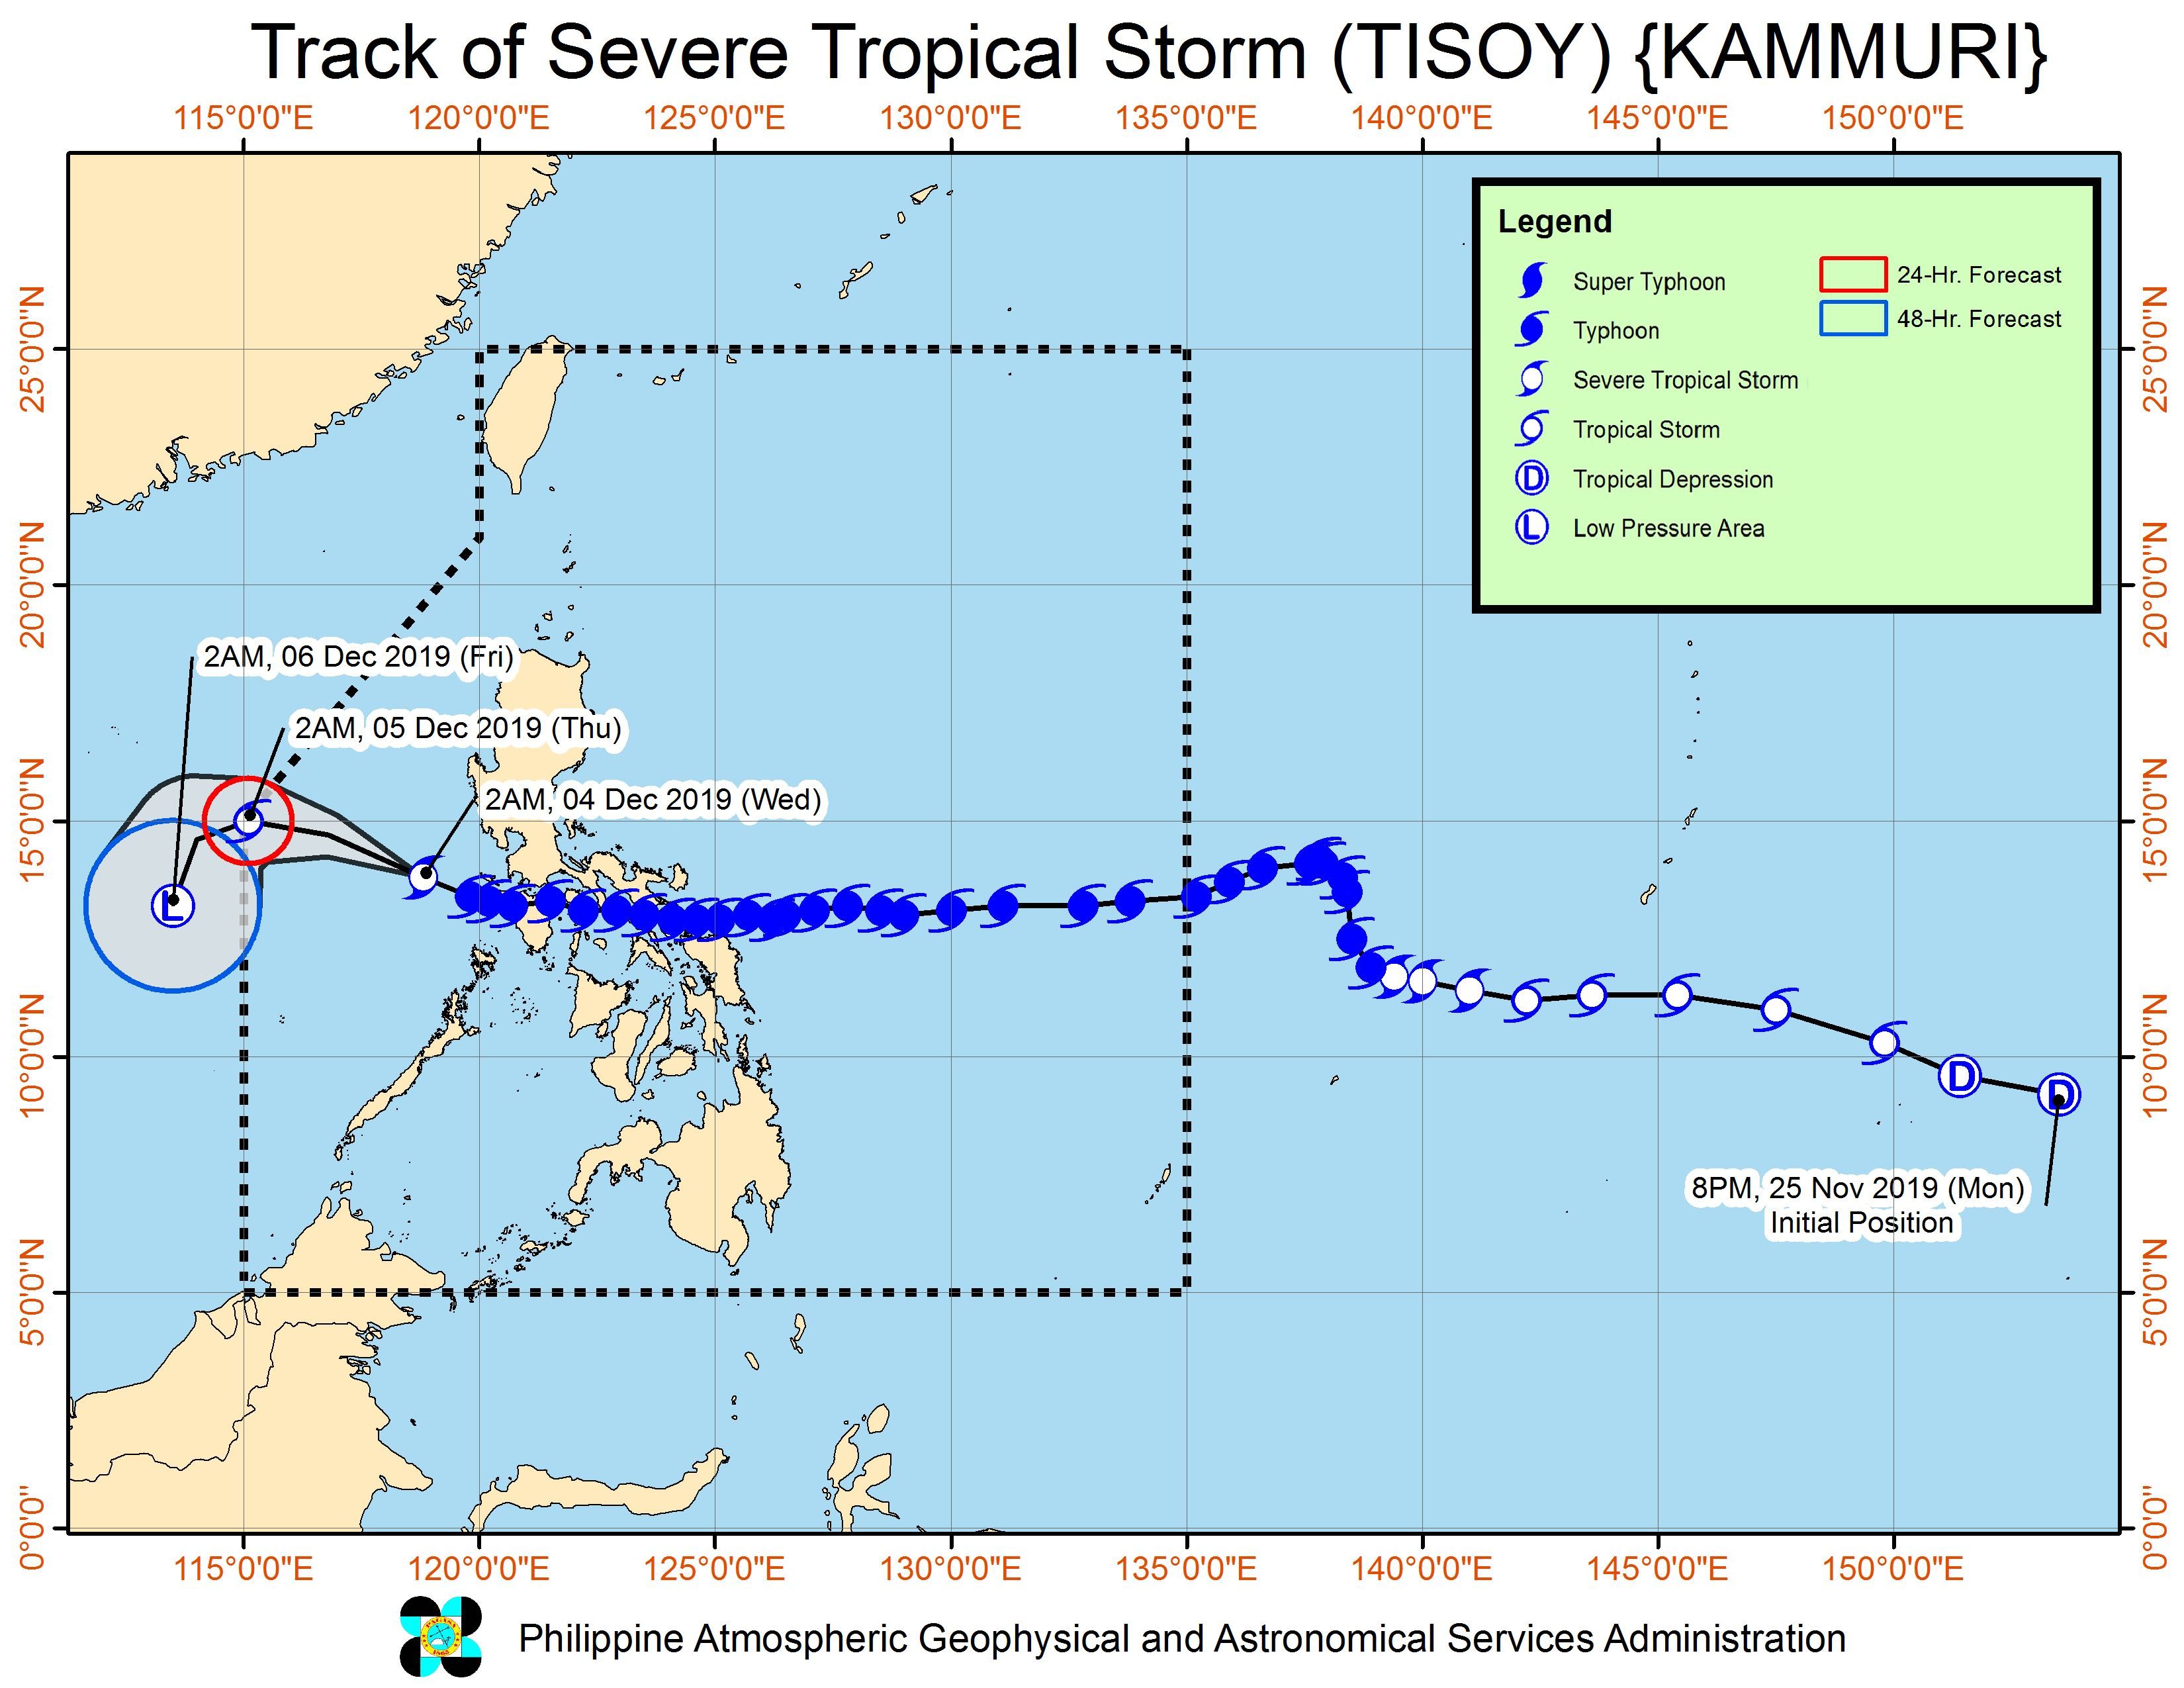 Forecast track of Severe Tropical Storm Tisoy (Kammuri) as of December 4, 2019, 5 am. Image from PAGASA 